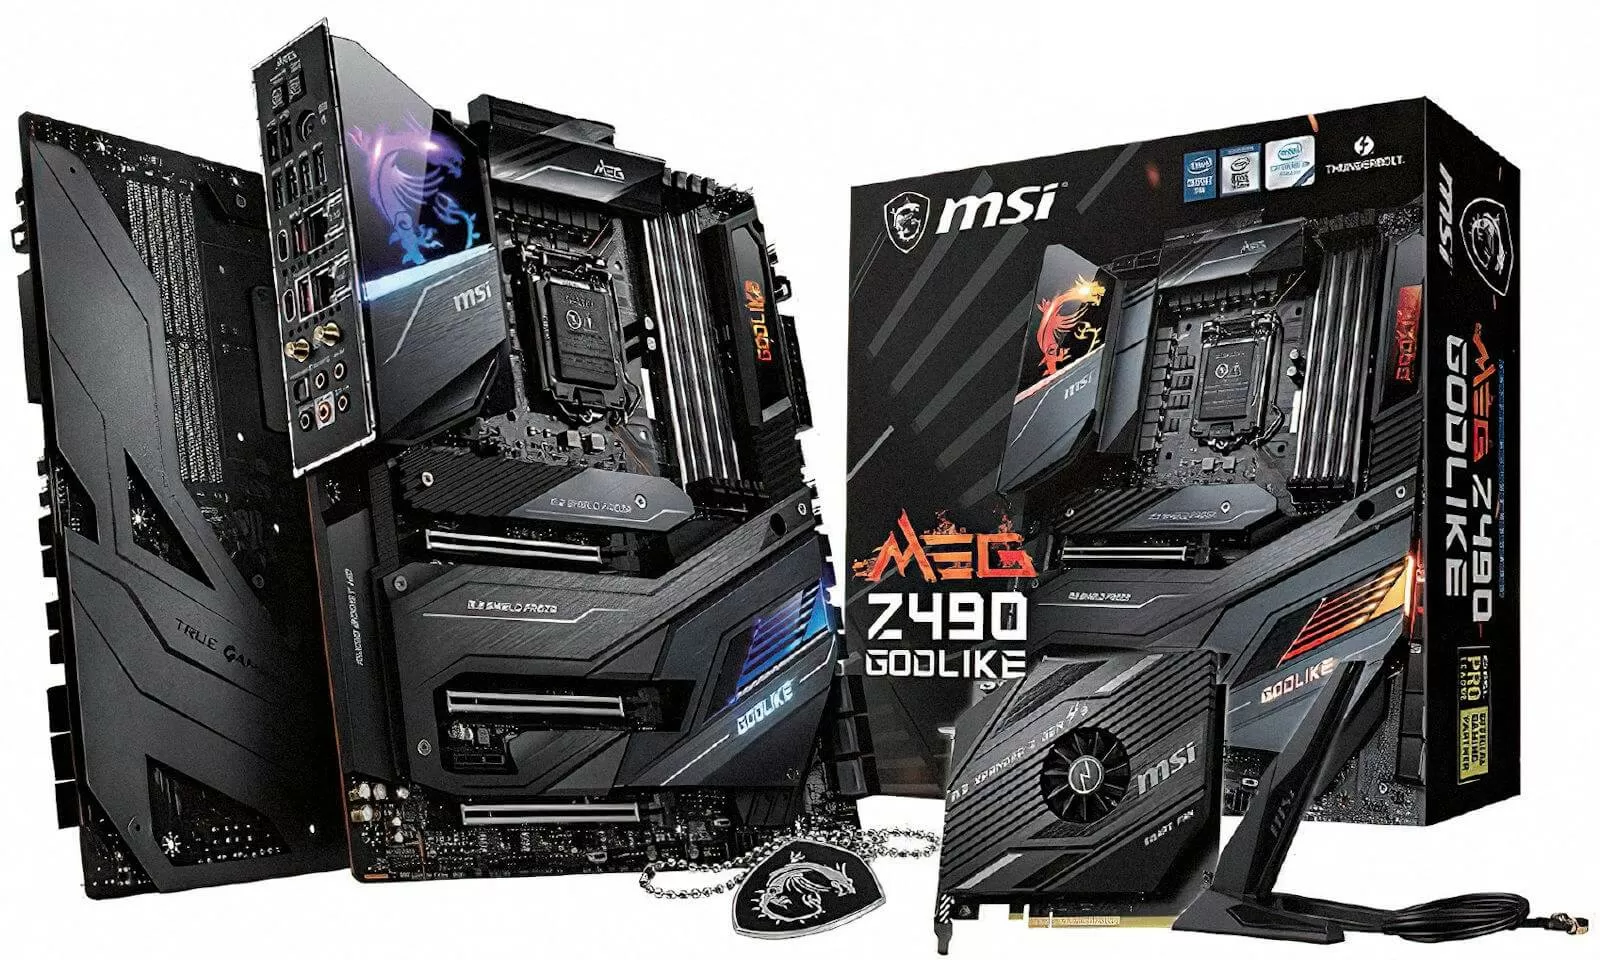 MSI offering up to $50 of Steam credit for upgrading to Z490 motherboard